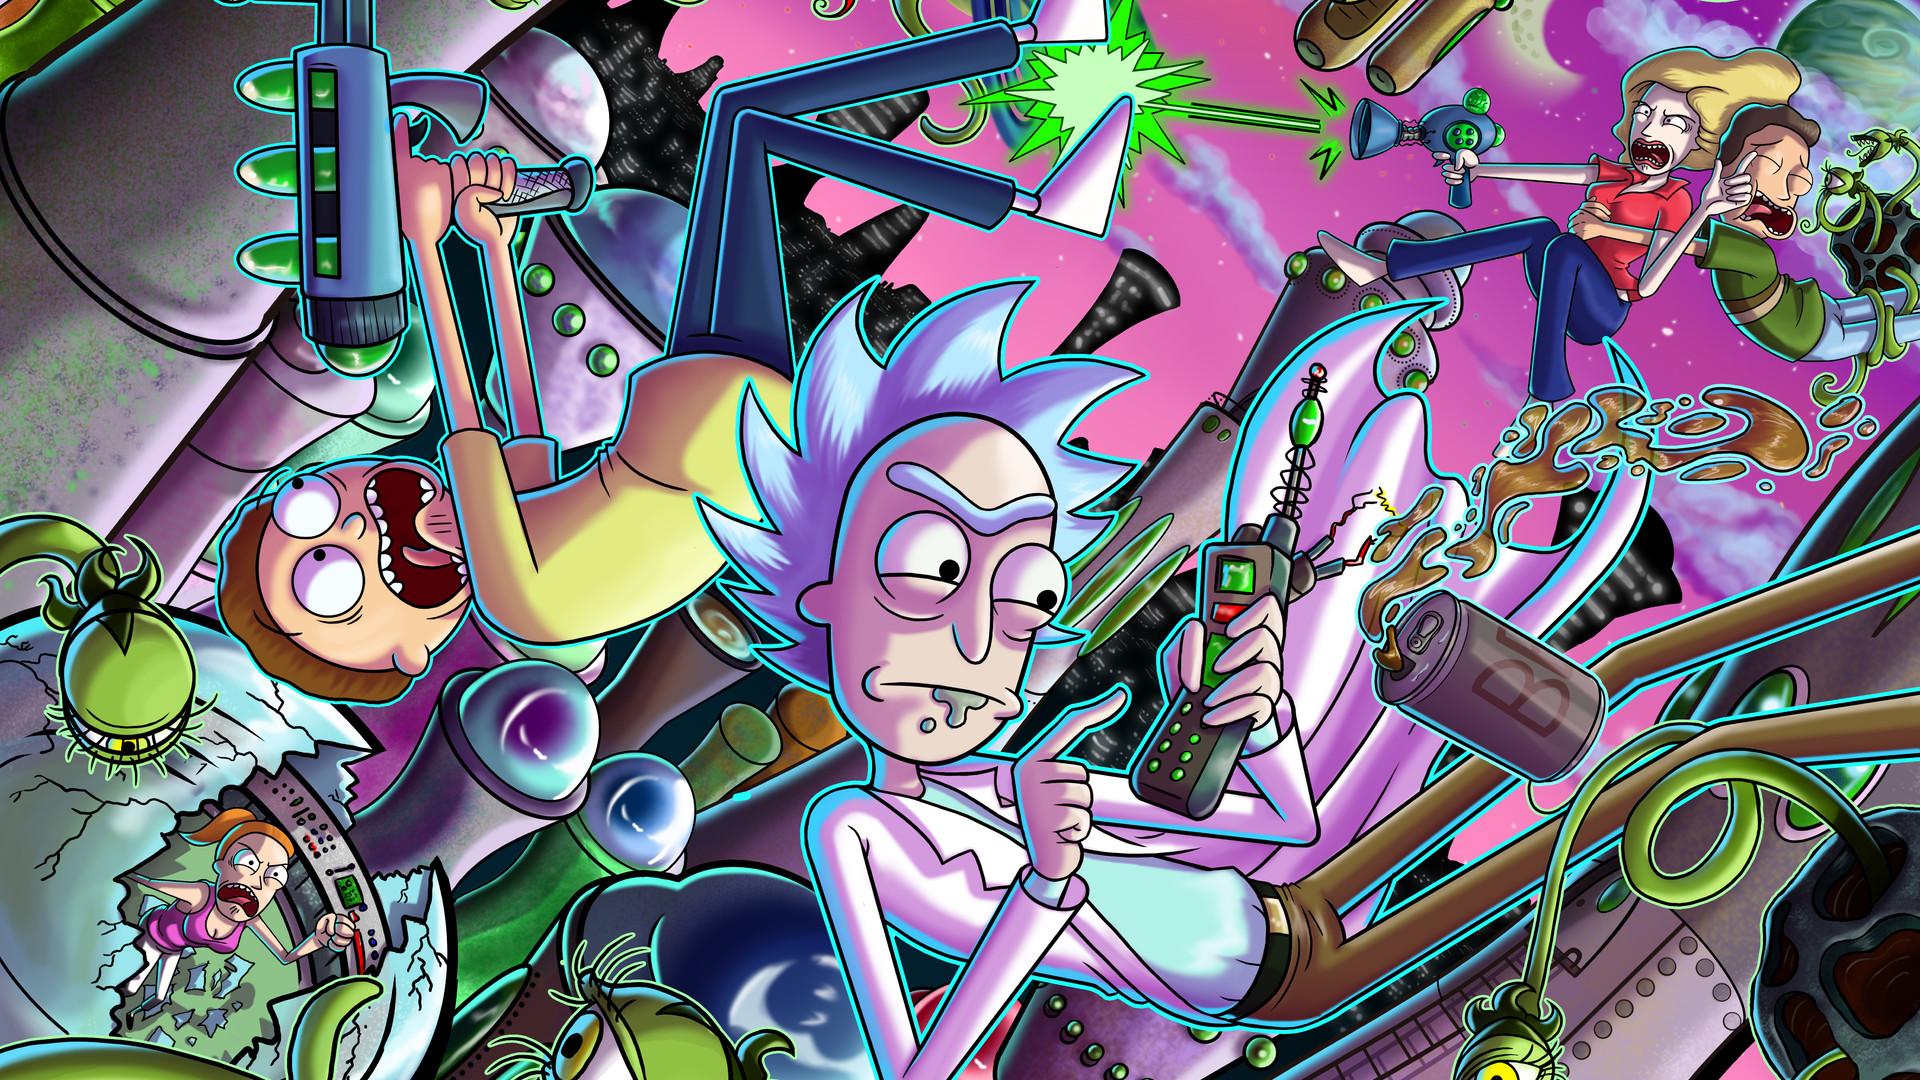 Rick and Morty Wallpaper 1080P background picture